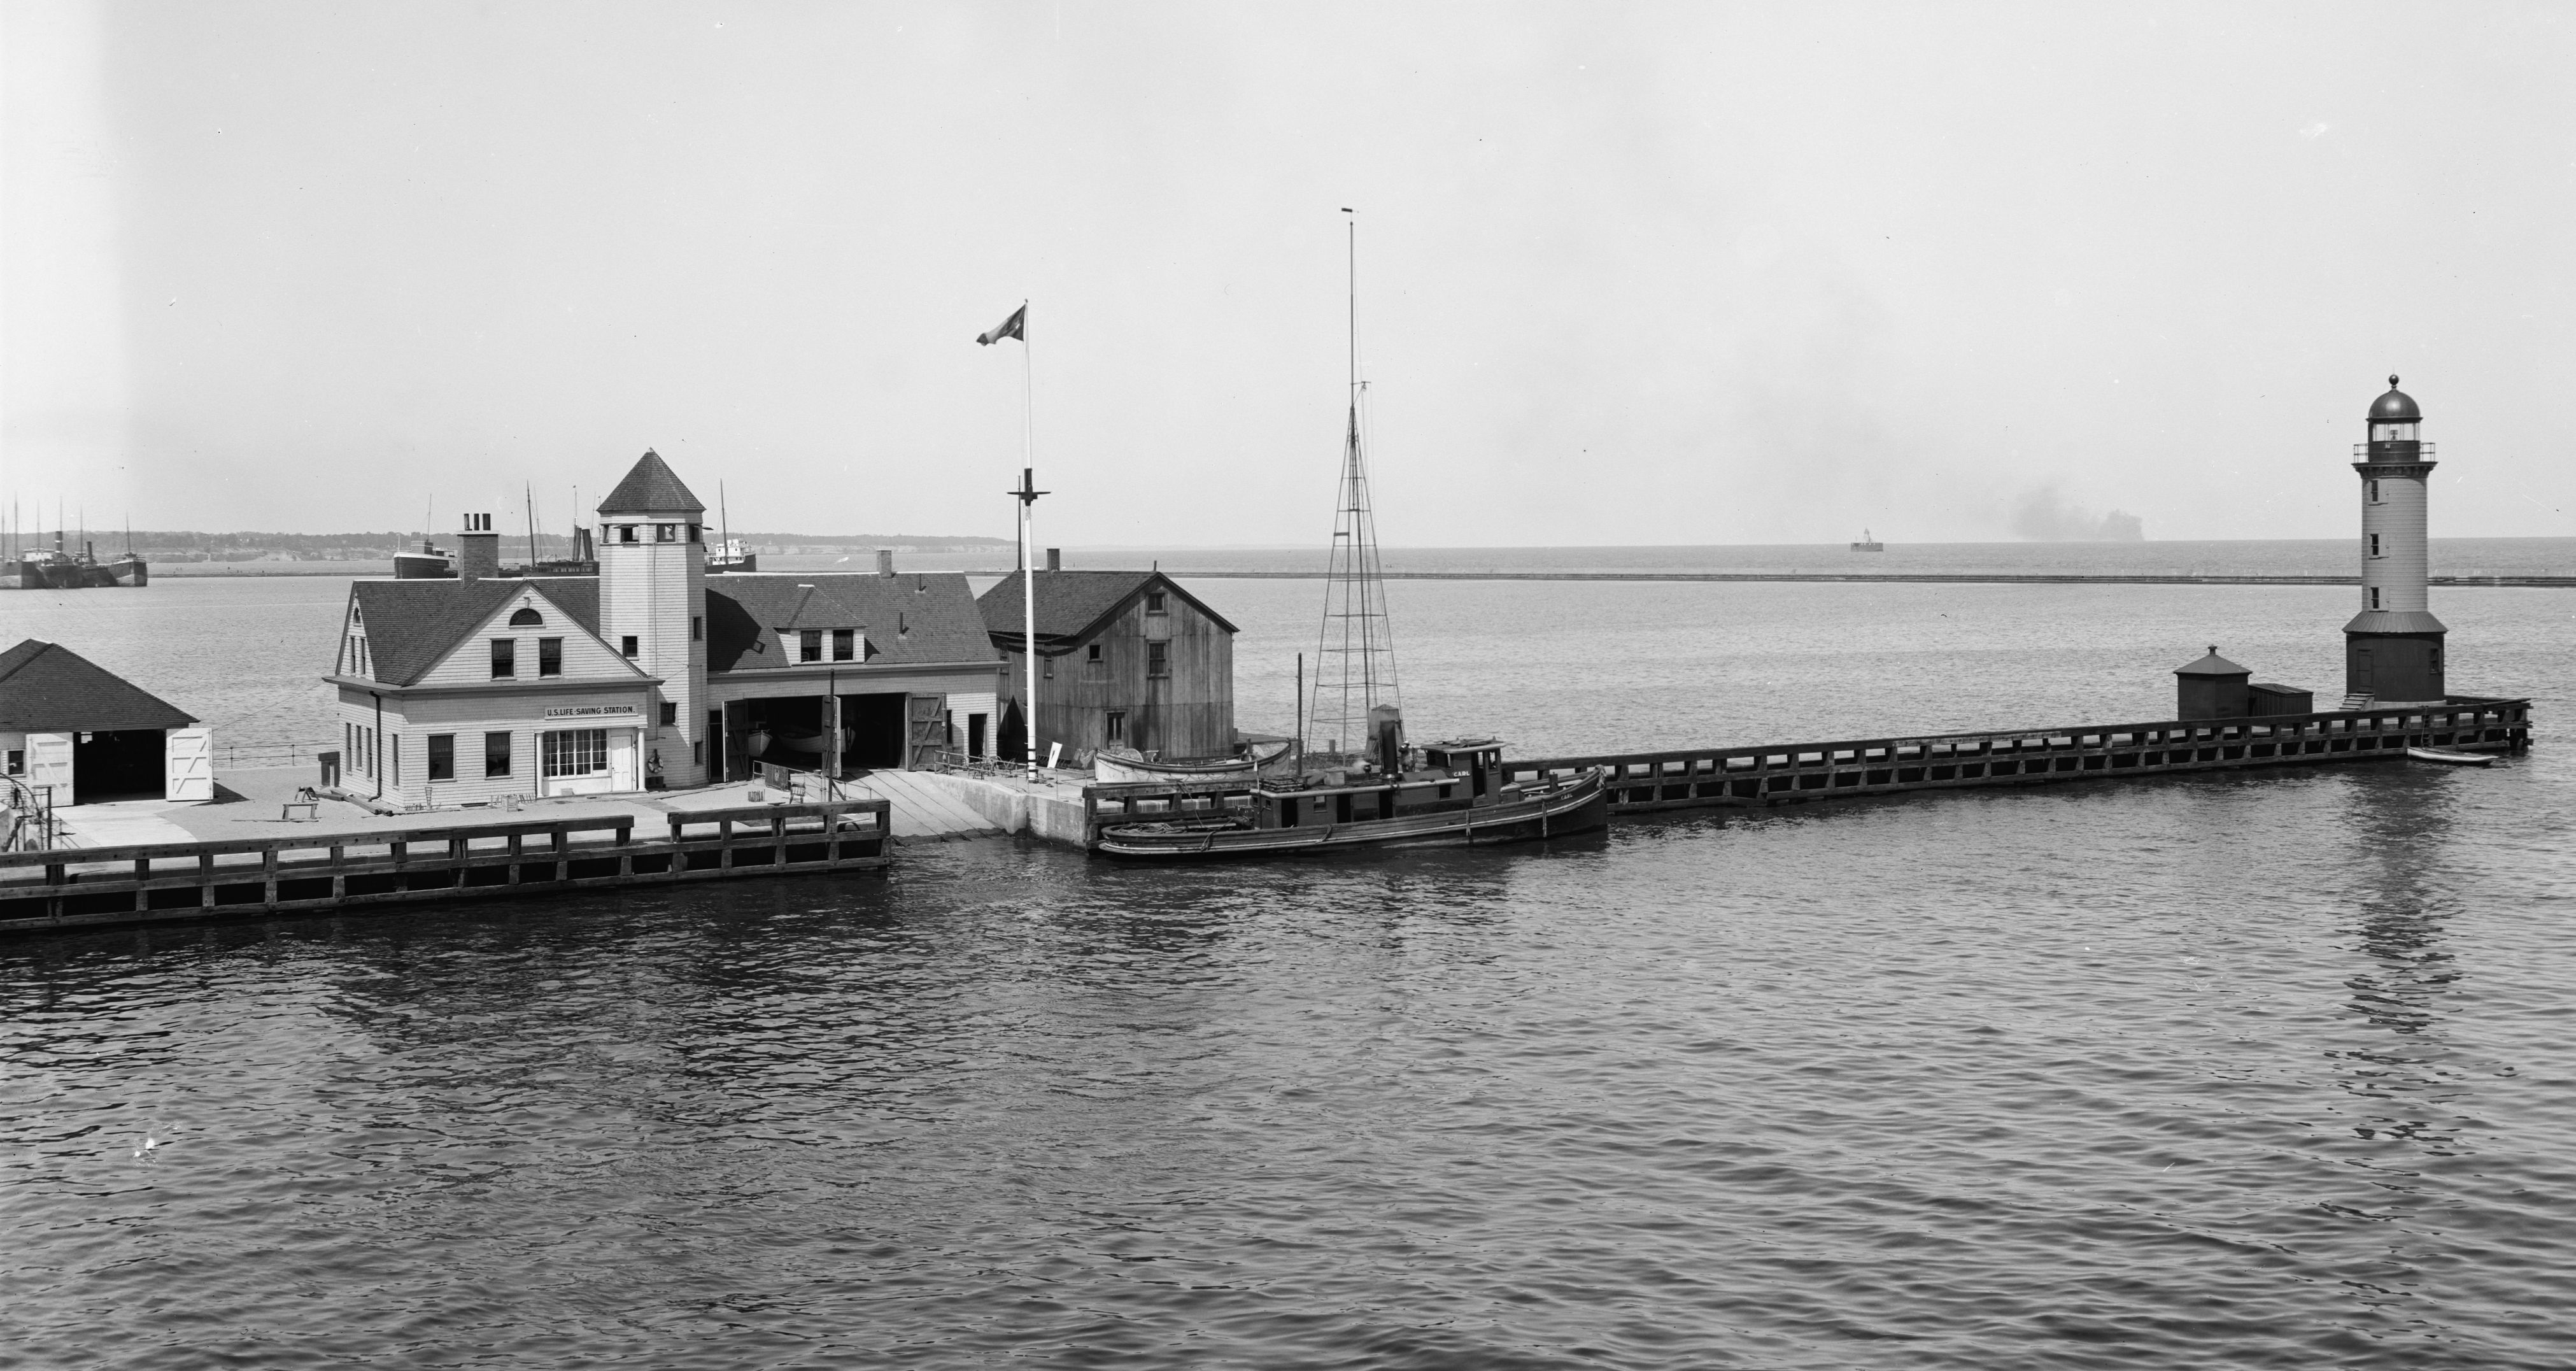 A vintage photograph of the Cleveland Lifesaving Station as it looked in the late 1800s. (Library of Congress)